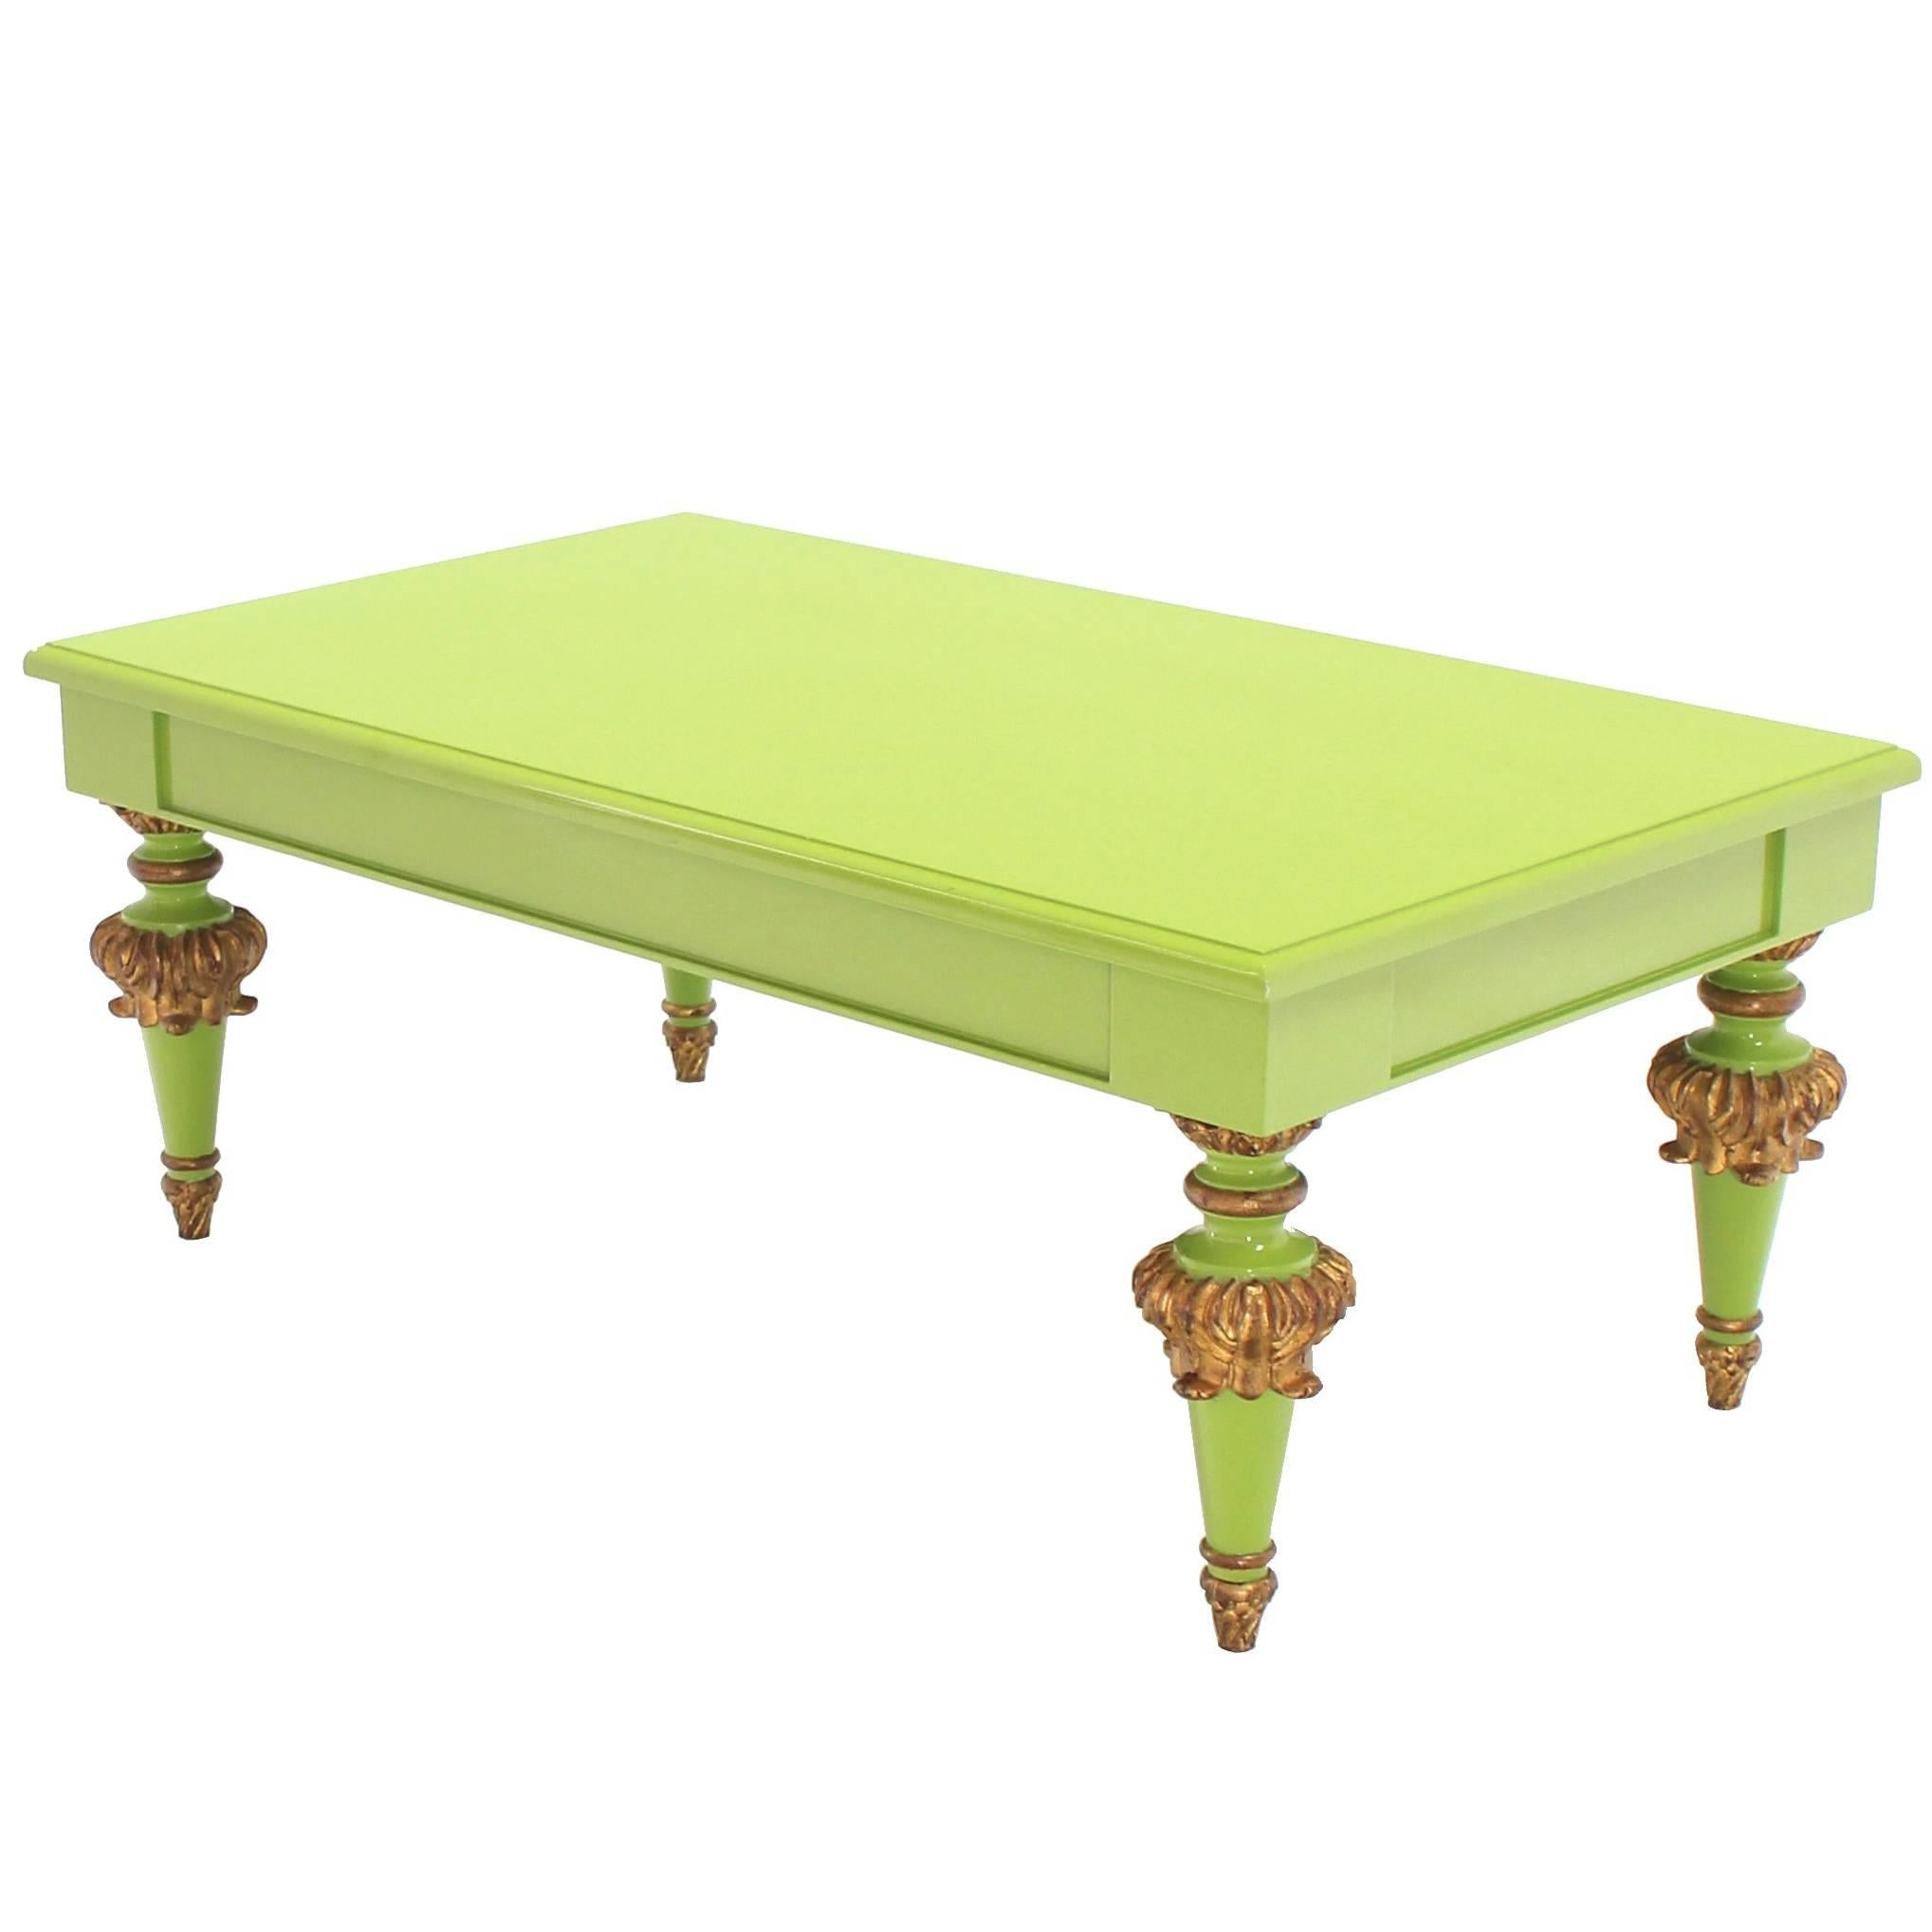 Salad Green Lacquer Gold Hollywood Regency Rectangular Coffee Table